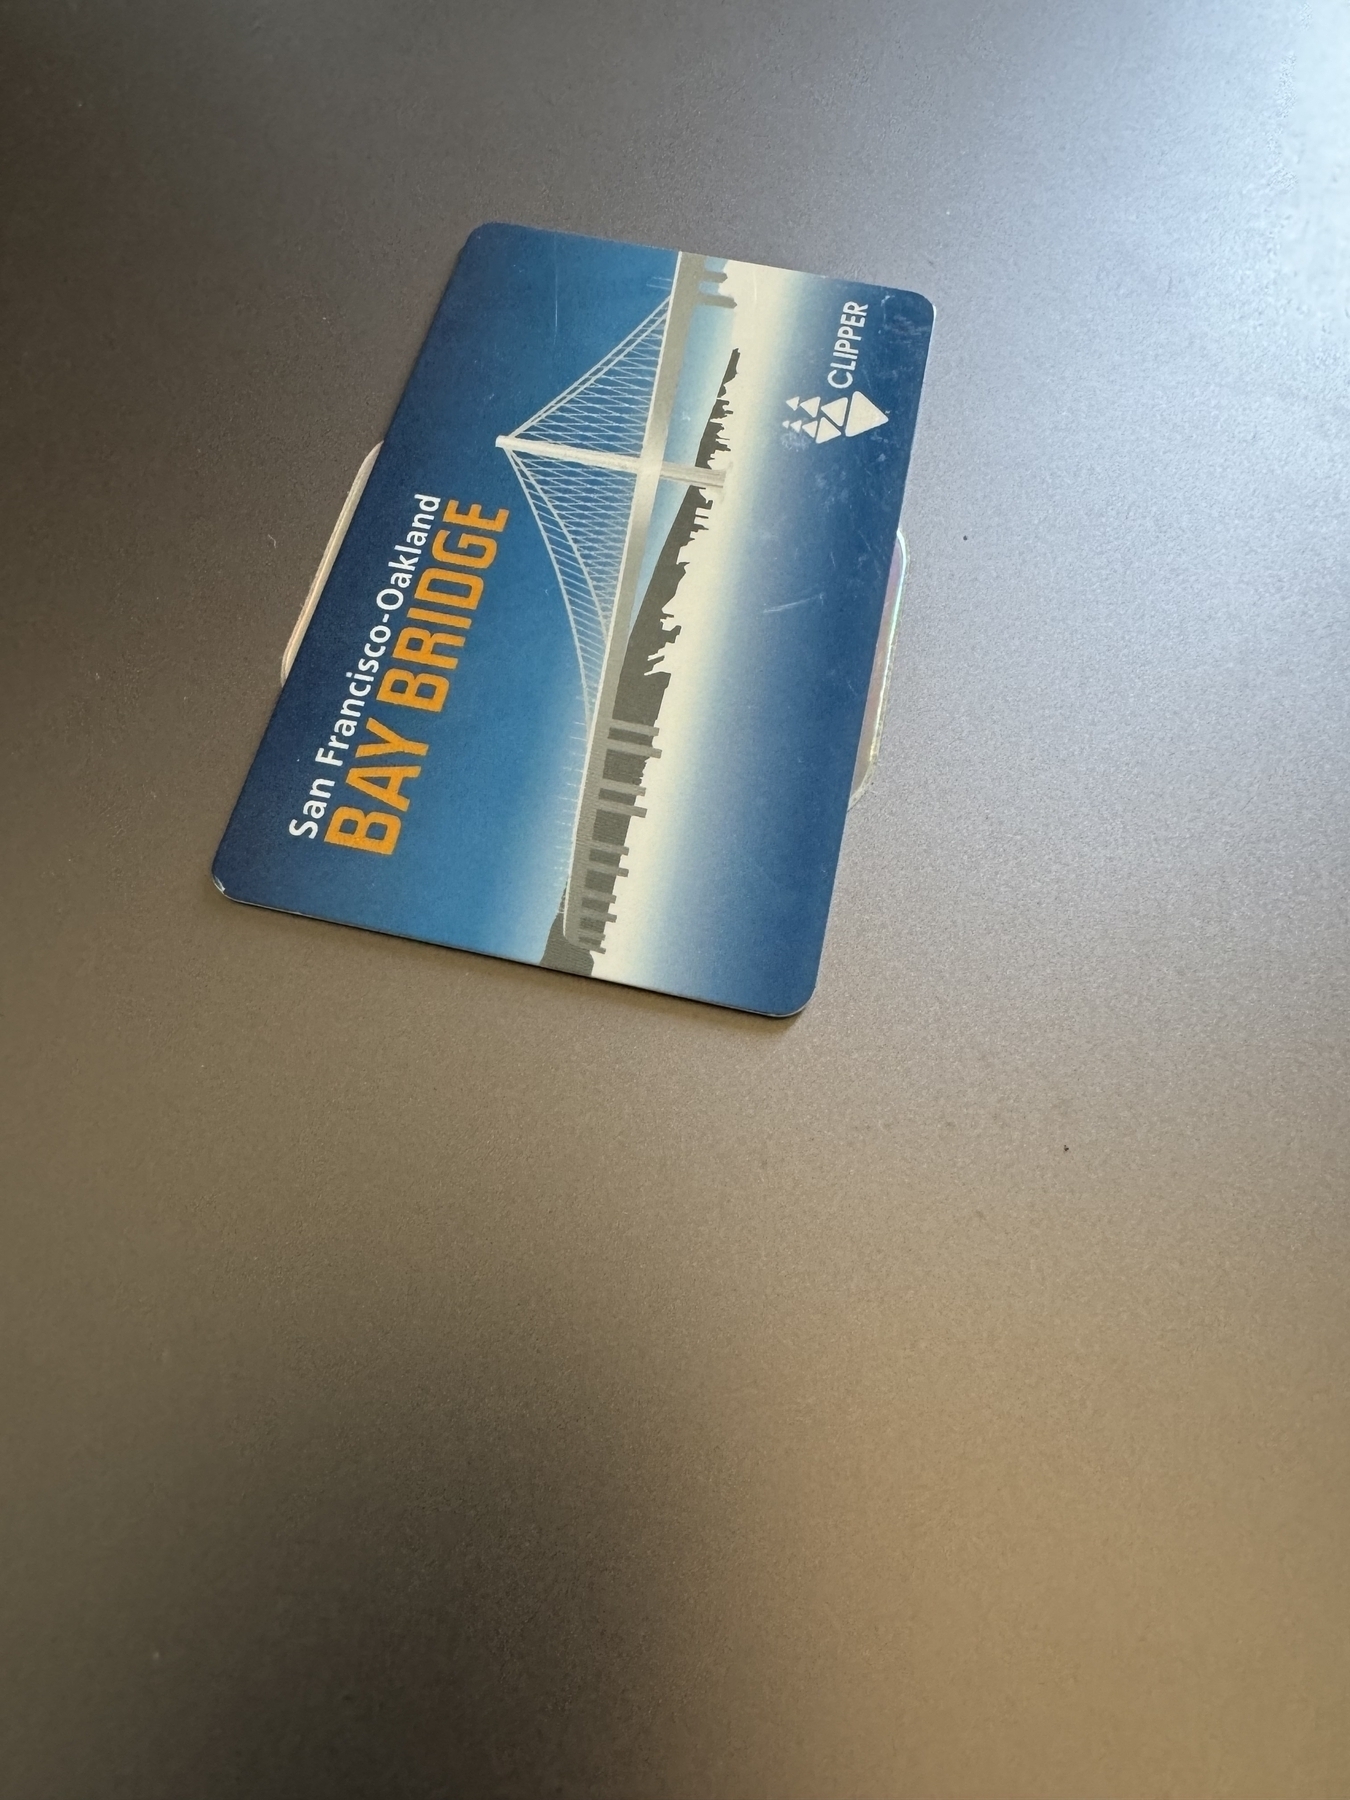 A Clipper card used for the Bay Area public transport 